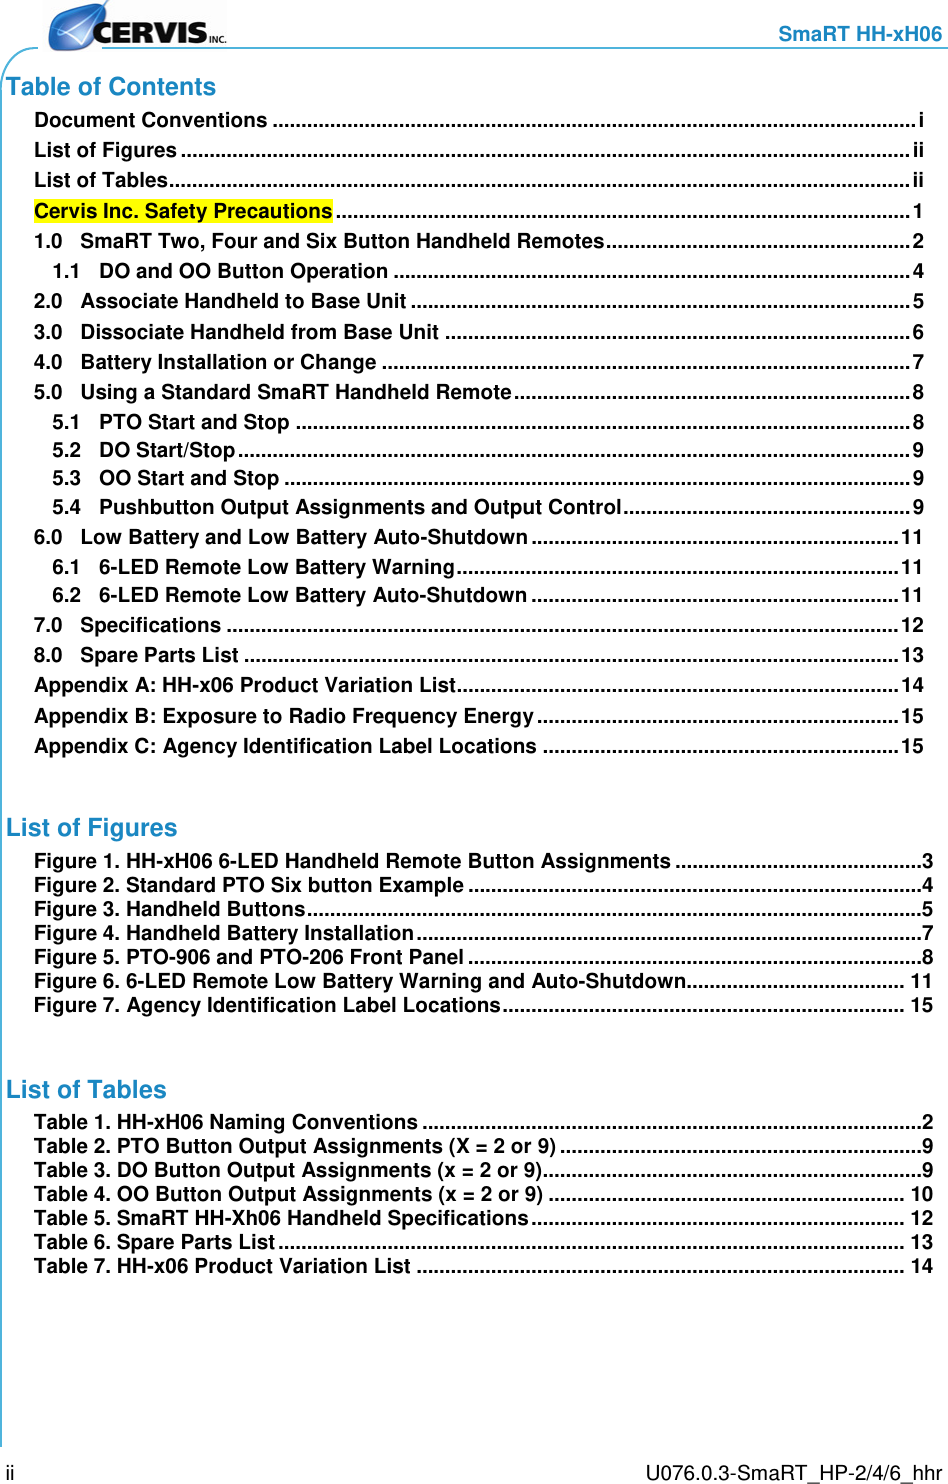     SmaRT HH-xH06     U076.0.3-SmaRT_HP-2/4/6_hhr ii Table of Contents Document Conventions ................................................................................................................ i List of Figures ............................................................................................................................... ii List of Tables ................................................................................................................................. ii Cervis Inc. Safety Precautions .................................................................................................... 1 1.0 SmaRT Two, Four and Six Button Handheld Remotes ..................................................... 2 1.1 DO and OO Button Operation .......................................................................................... 4 2.0 Associate Handheld to Base Unit ....................................................................................... 5 3.0 Dissociate Handheld from Base Unit ................................................................................. 6 4.0 Battery Installation or Change ............................................................................................ 7 5.0 Using a Standard SmaRT Handheld Remote ..................................................................... 8 5.1 PTO Start and Stop ........................................................................................................... 8 5.2 DO Start/Stop ..................................................................................................................... 9 5.3 OO Start and Stop ............................................................................................................. 9 5.4 Pushbutton Output Assignments and Output Control .................................................. 9 6.0 Low Battery and Low Battery Auto-Shutdown ................................................................ 11 6.1 6-LED Remote Low Battery Warning ............................................................................. 11 6.2 6-LED Remote Low Battery Auto-Shutdown ................................................................ 11 7.0 Specifications ..................................................................................................................... 12 8.0 Spare Parts List .................................................................................................................. 13 Appendix A: HH-x06 Product Variation List............................................................................. 14 Appendix B: Exposure to Radio Frequency Energy ............................................................... 15 Appendix C: Agency Identification Label Locations .............................................................. 15  List of Figures Figure 1. HH-xH06 6-LED Handheld Remote Button Assignments ...........................................3 Figure 2. Standard PTO Six button Example ...............................................................................4 Figure 3. Handheld Buttons ...........................................................................................................5 Figure 4. Handheld Battery Installation ........................................................................................7 Figure 5. PTO-906 and PTO-206 Front Panel ...............................................................................8 Figure 6. 6-LED Remote Low Battery Warning and Auto-Shutdown...................................... 11 Figure 7. Agency Identification Label Locations ...................................................................... 15  List of Tables Table 1. HH-xH06 Naming Conventions .......................................................................................2 Table 2. PTO Button Output Assignments (X = 2 or 9) ...............................................................9 Table 3. DO Button Output Assignments (x = 2 or 9)..................................................................9 Table 4. OO Button Output Assignments (x = 2 or 9) .............................................................. 10 Table 5. SmaRT HH-Xh06 Handheld Specifications ................................................................. 12 Table 6. Spare Parts List ............................................................................................................. 13 Table 7. HH-x06 Product Variation List ..................................................................................... 14   